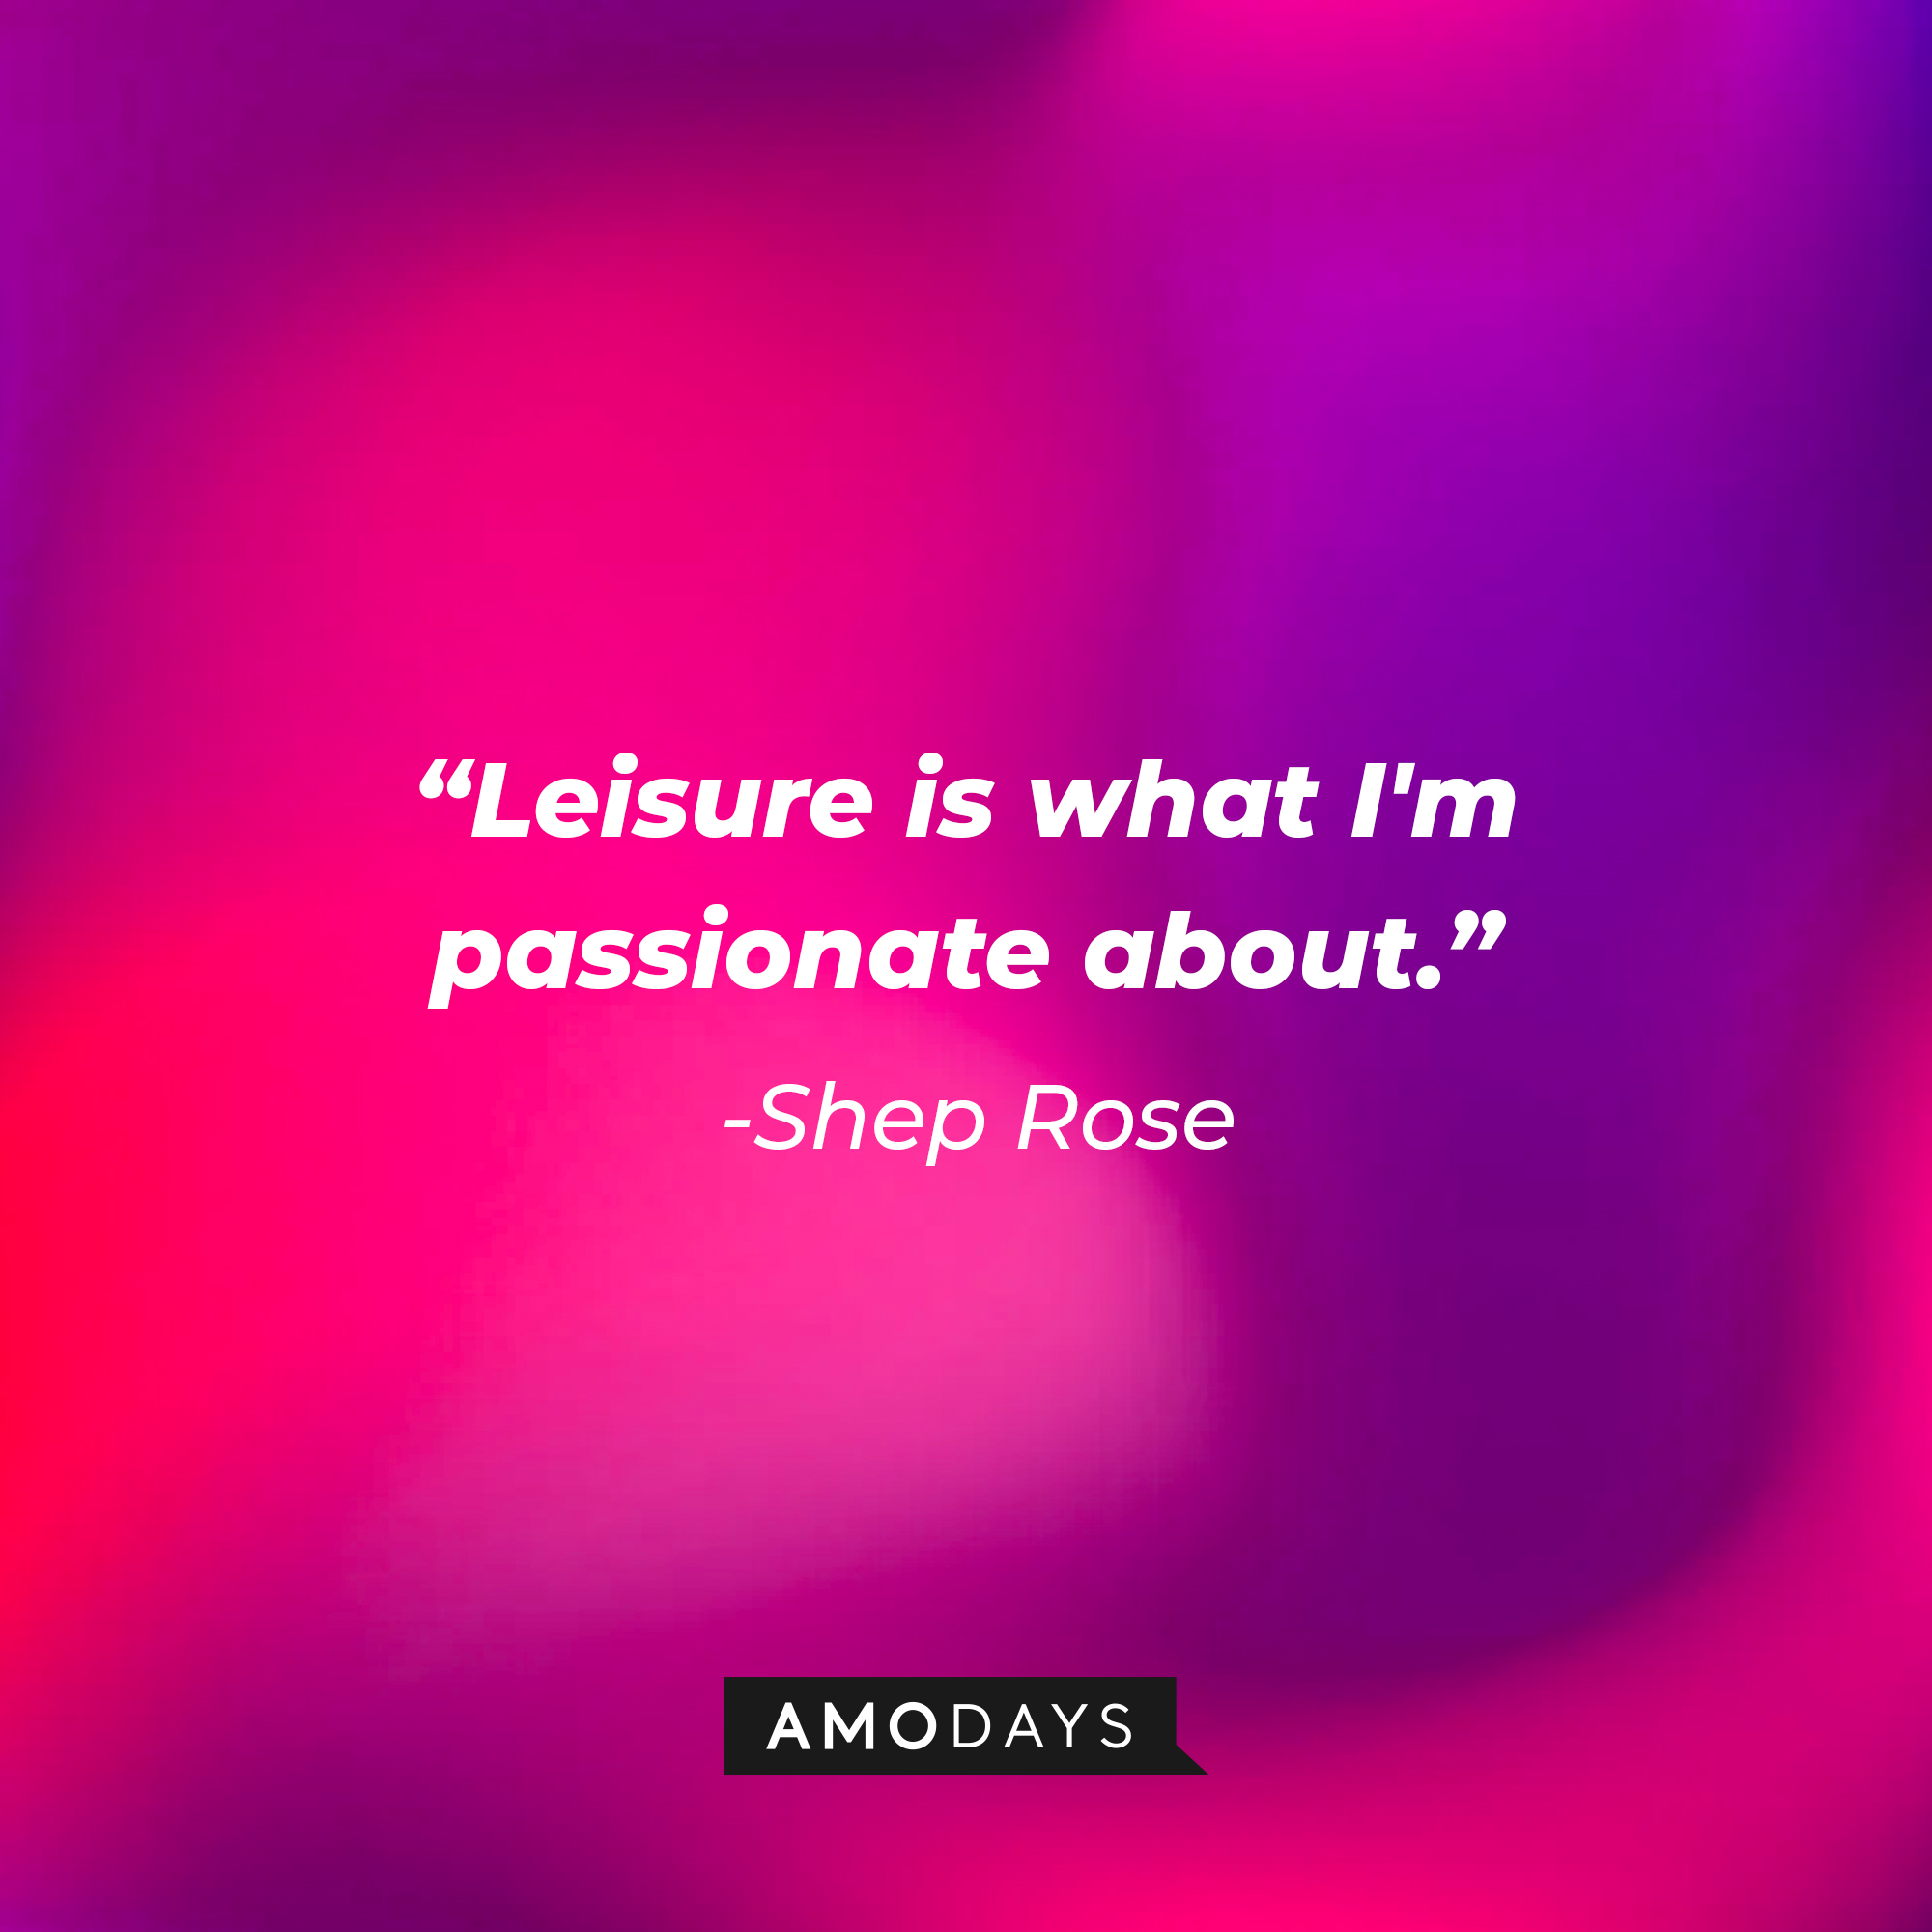 Shep Rose's quote: "Leisure is what I'm passionate about." | Source: AmoDays